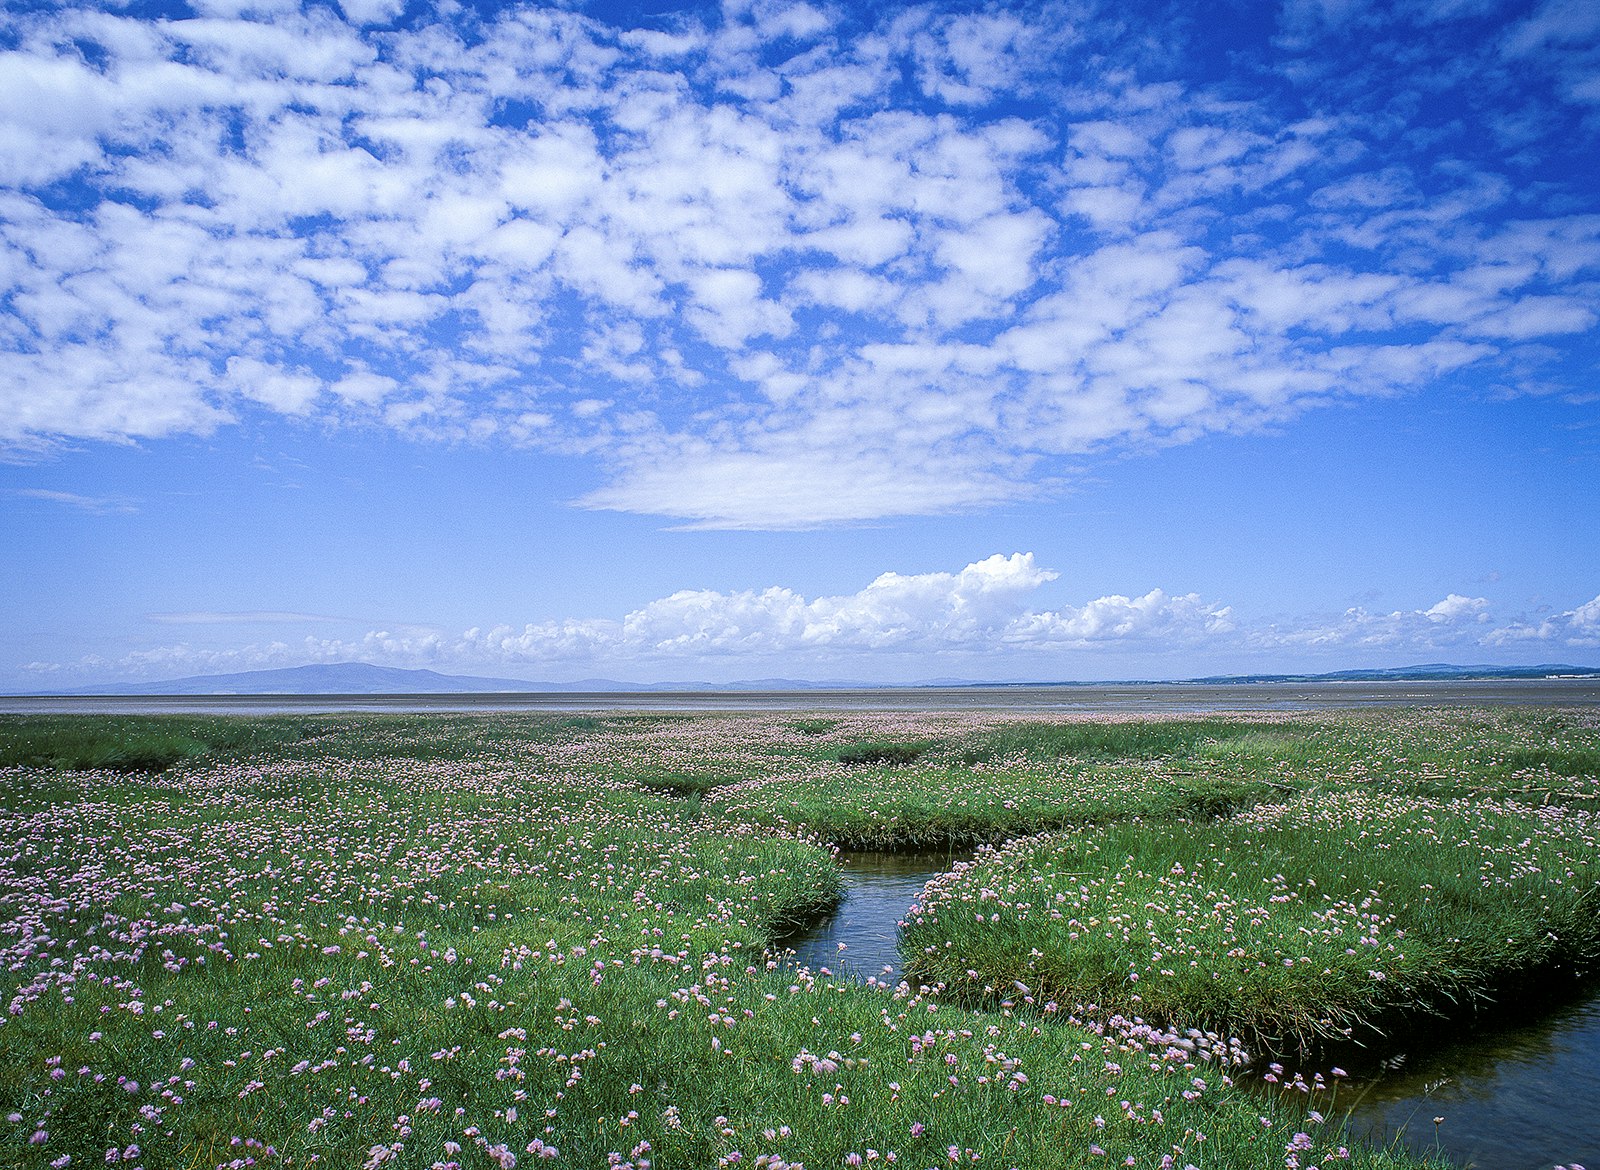 Small pink flowers bloom on grassy patches in a salt marsh. The sky is blue with small clouds. England.